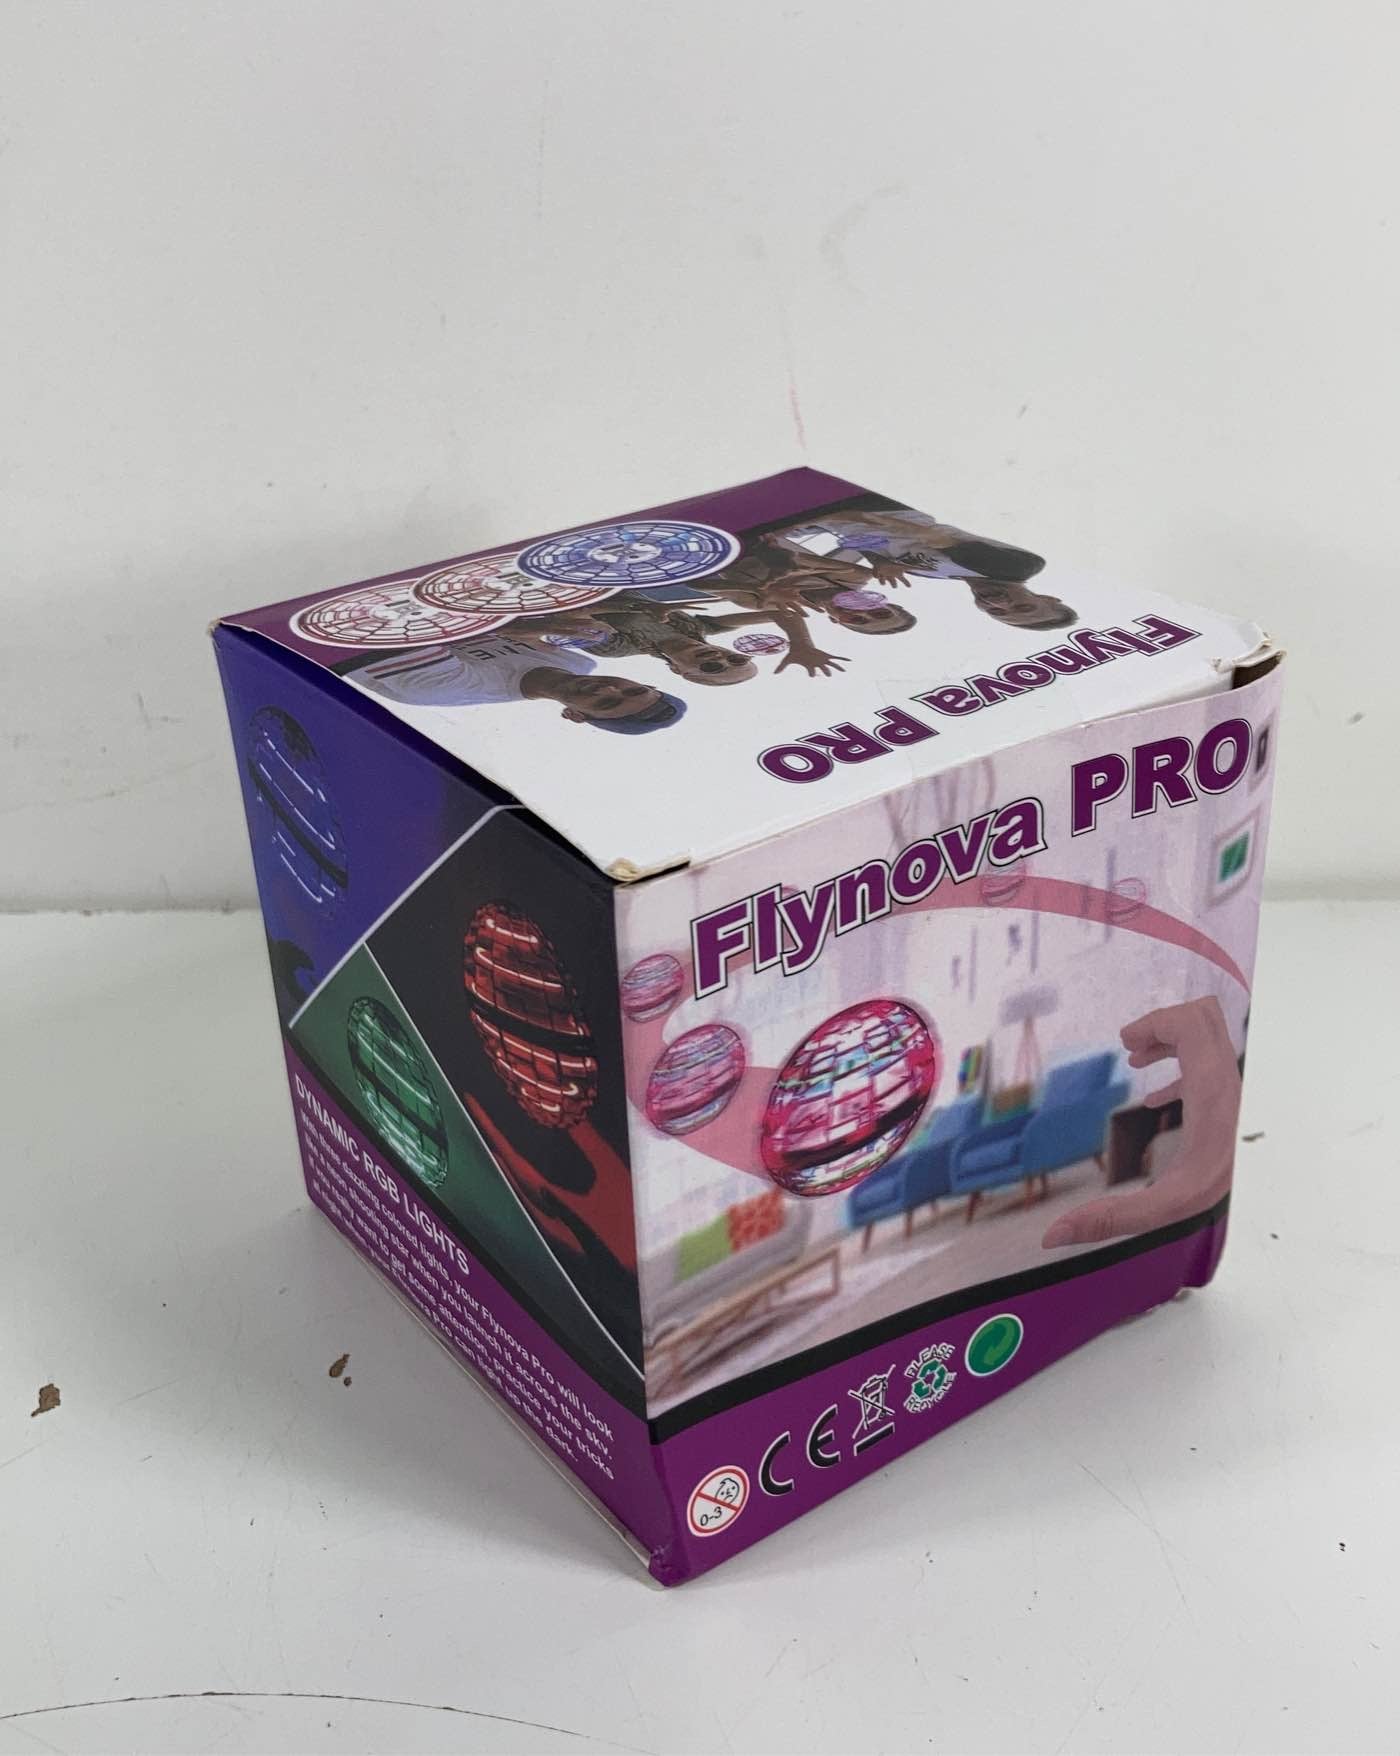 Flynova Pro Flying Toys That Brings Magic into Reality,Flying